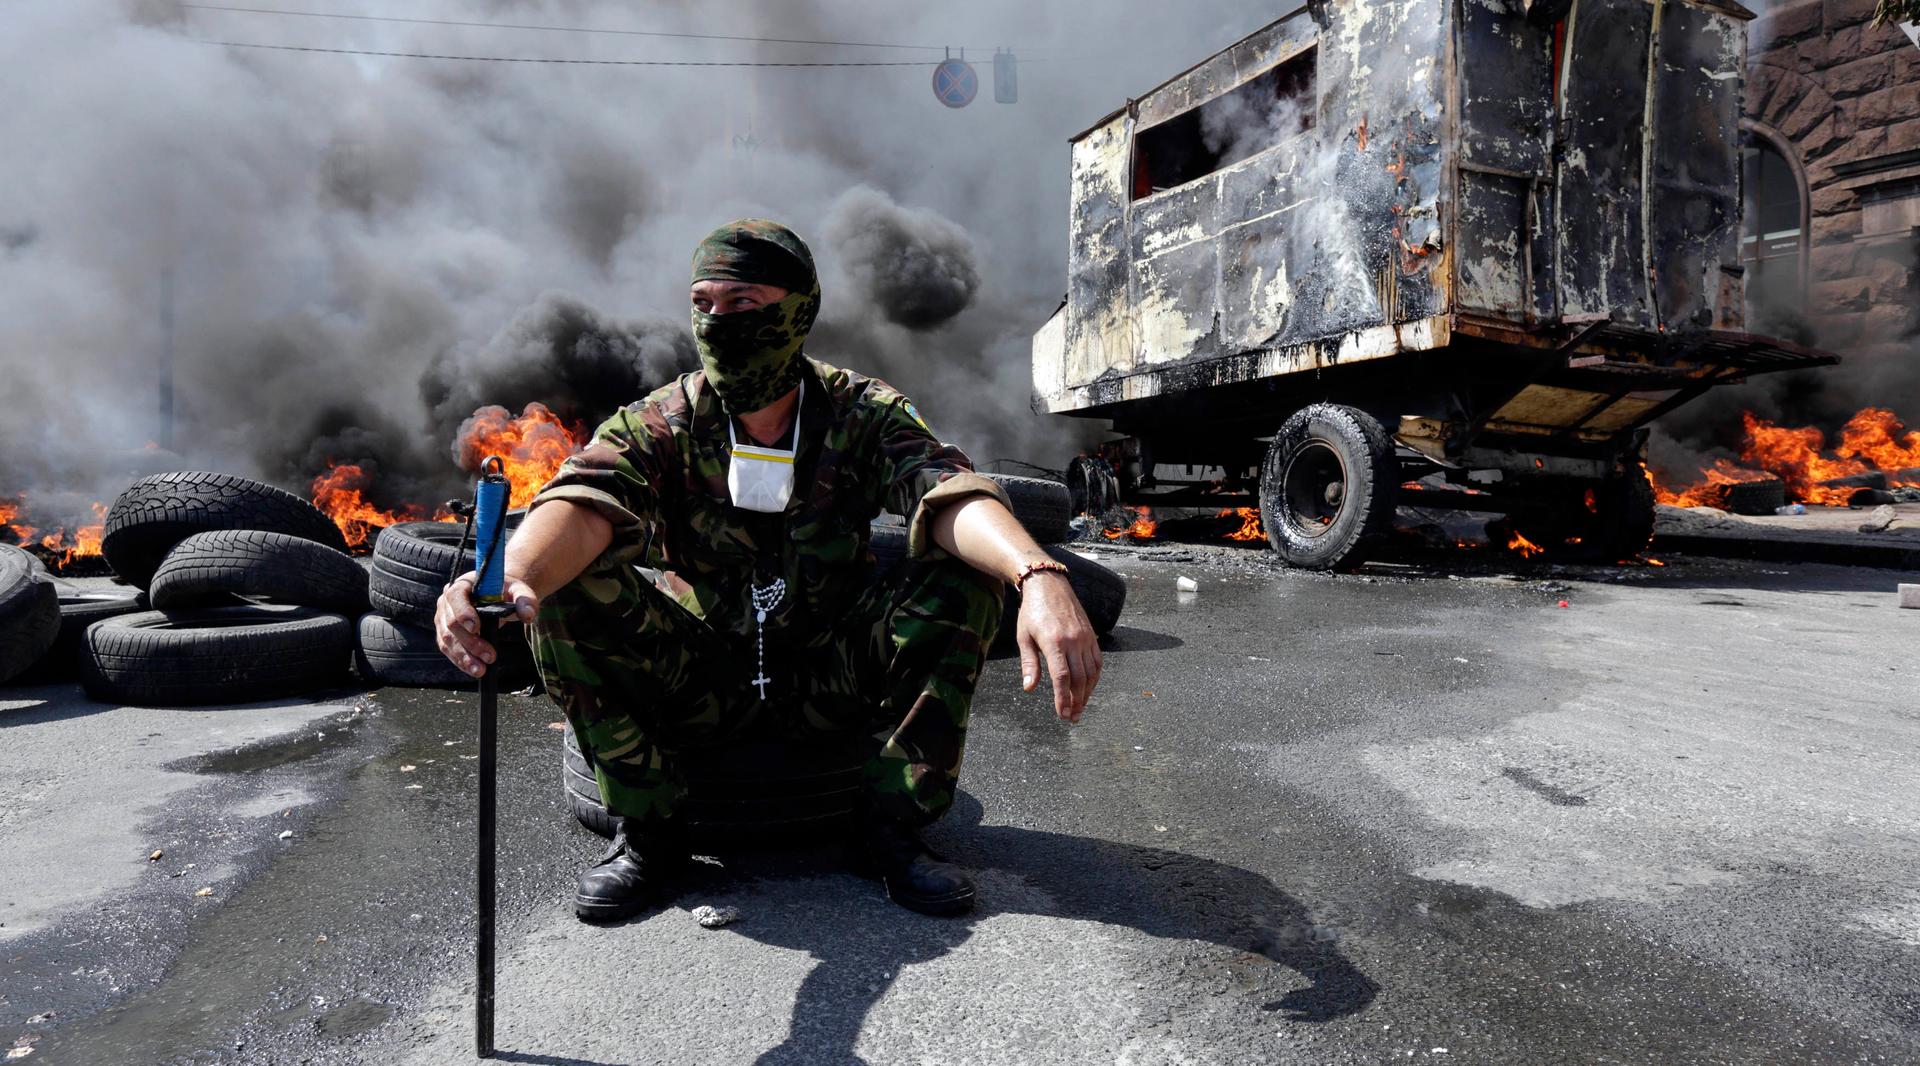 A protester sits in front of burning barricades during clashes with pro-government forces at Independence Square in Kiev, Ukraine on Aug. 7, 2014.